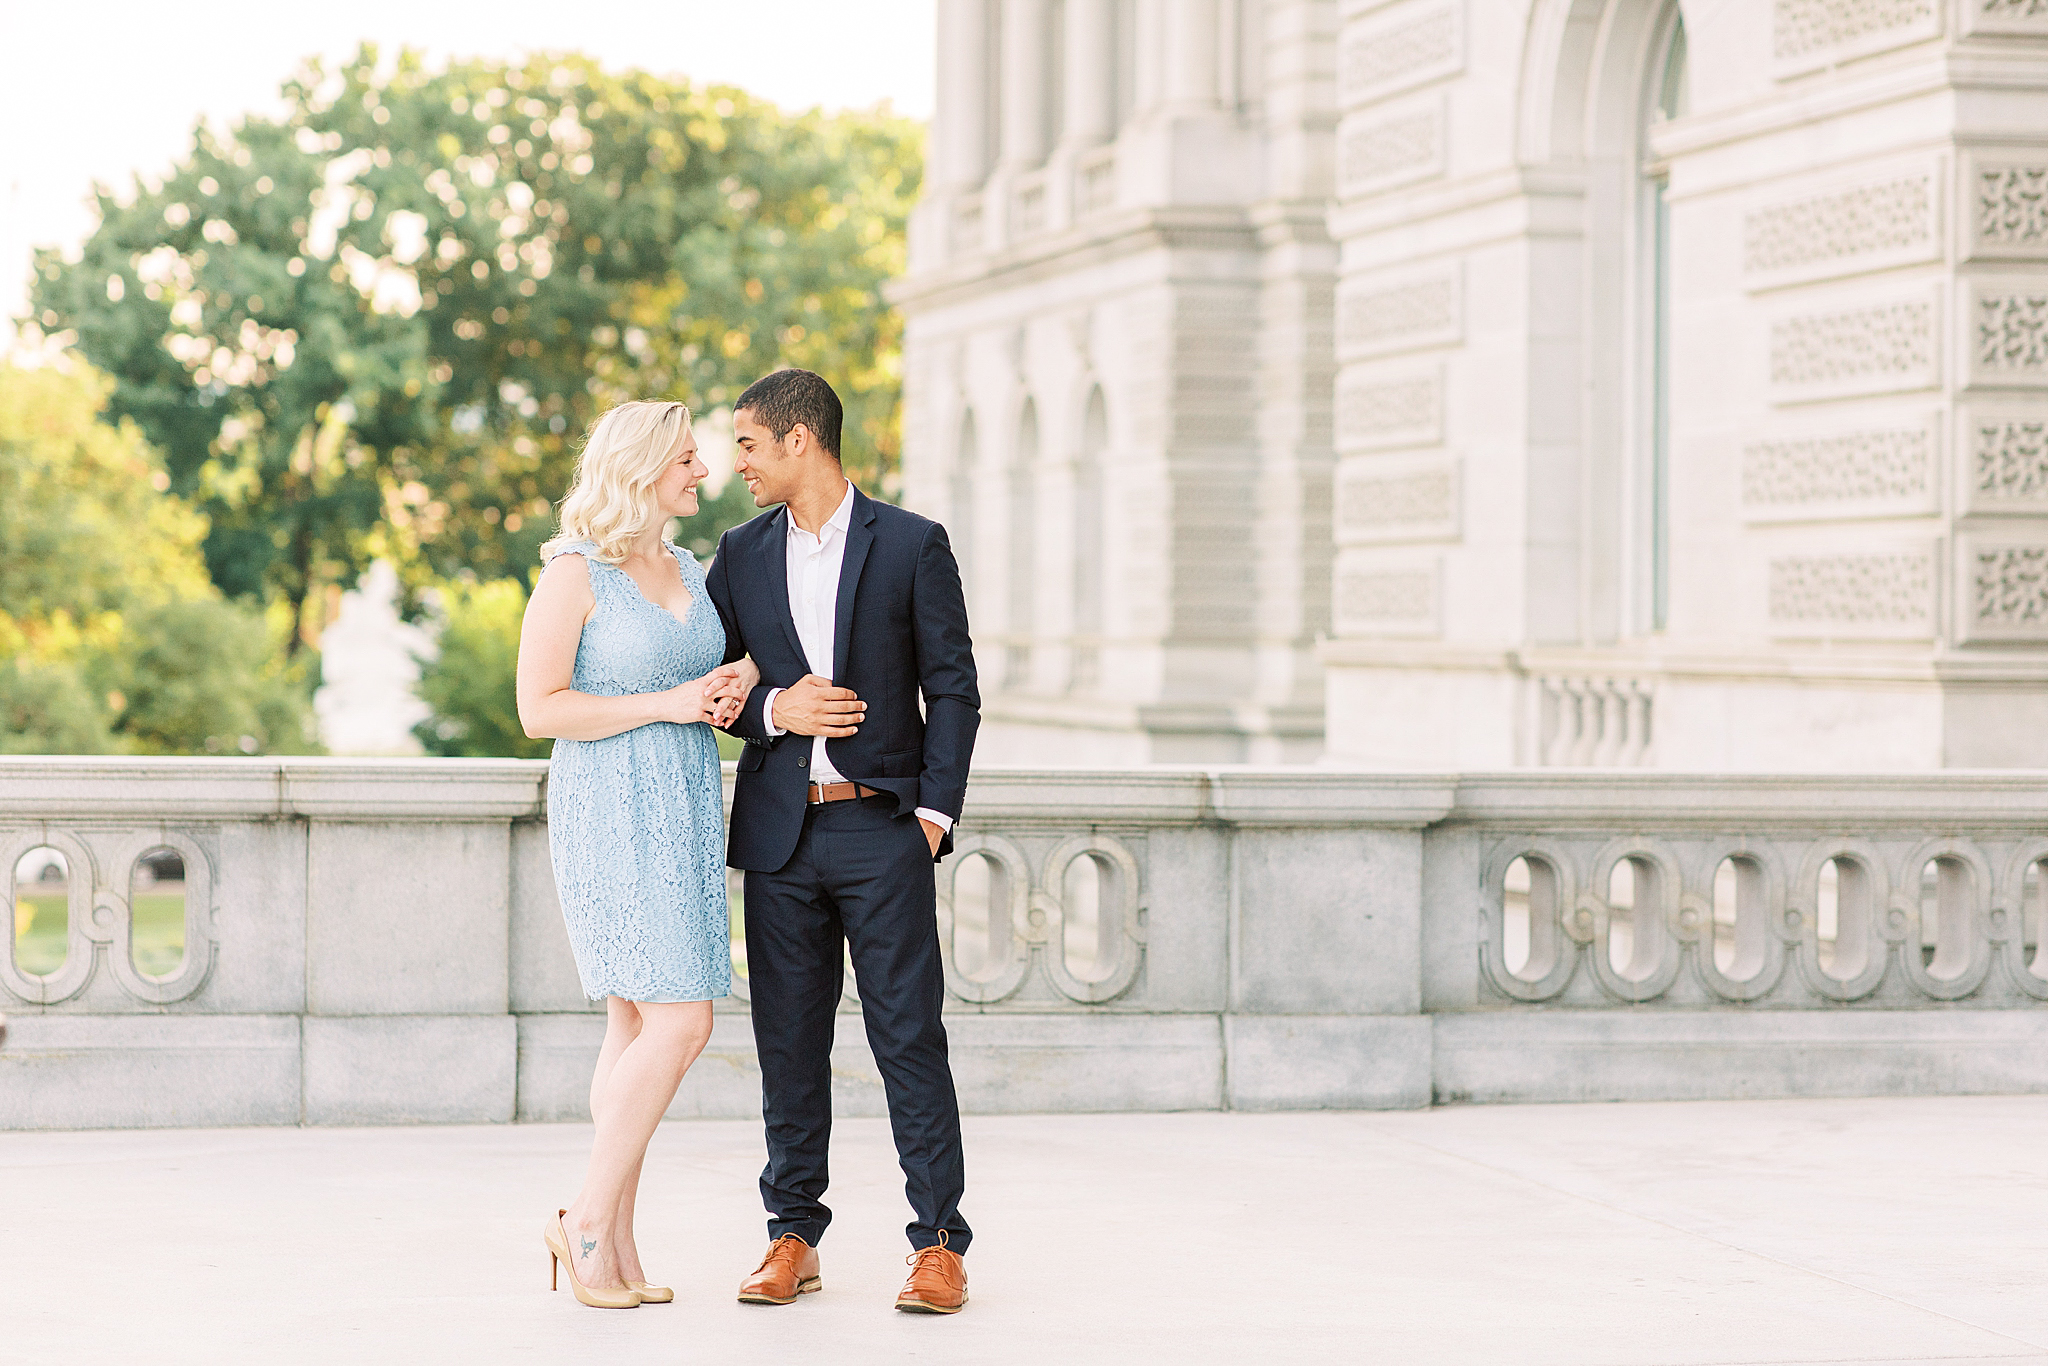 A light-filled summer engagement session in Washington, DC a the US Capitol and Library of Congress.